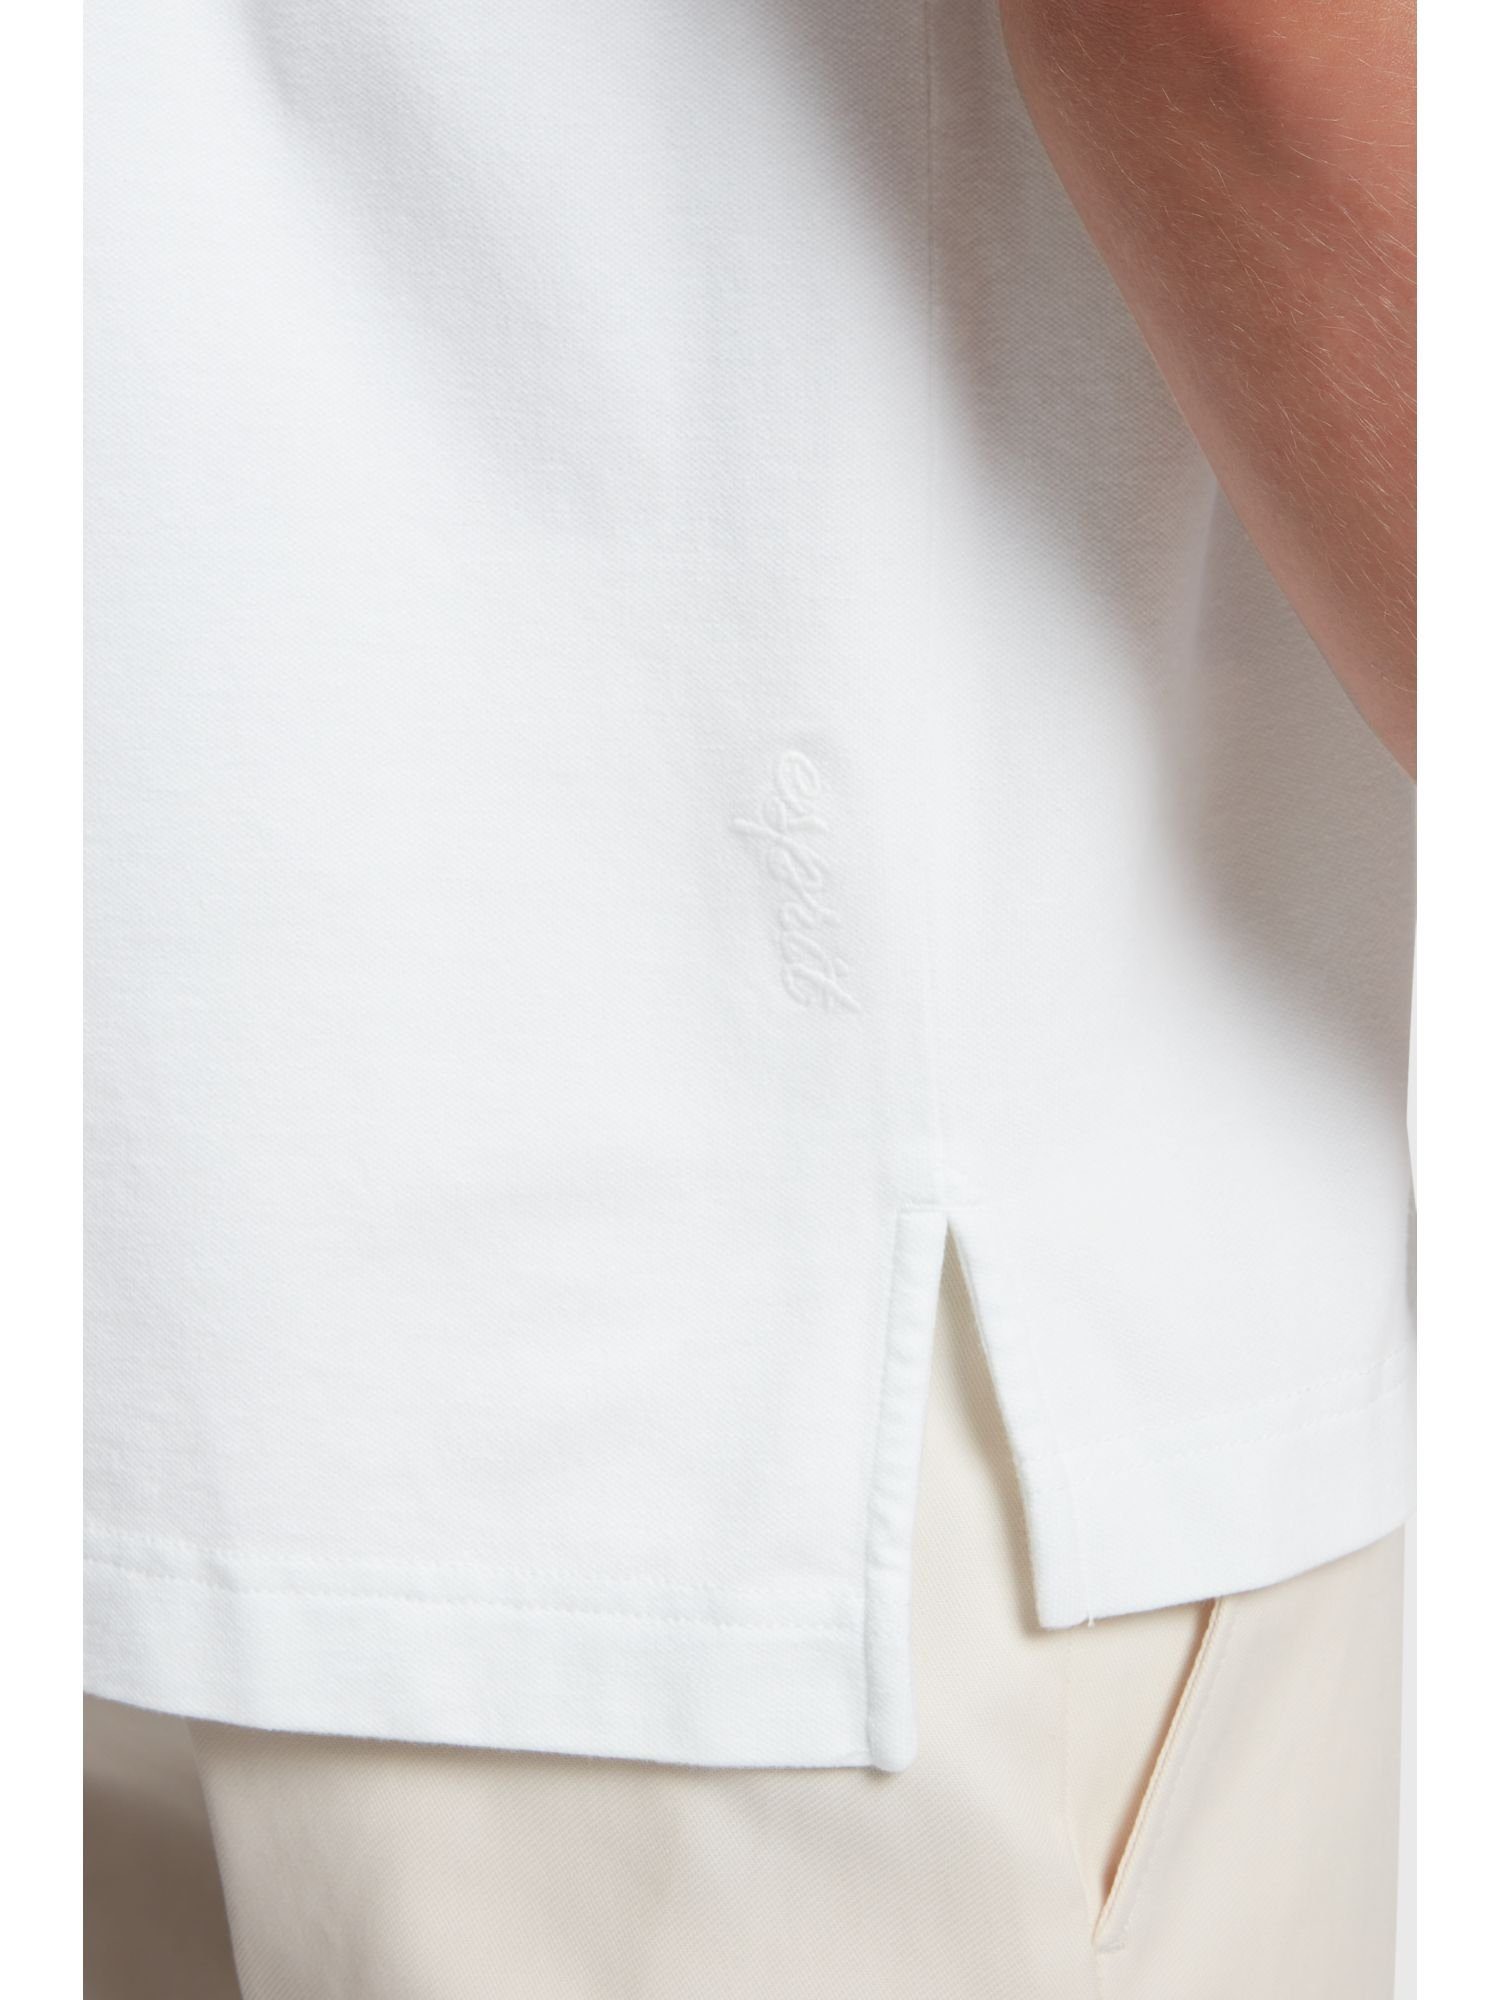 Poloshirt Esprit Dolphin-Badge mit Relaxed WHITE Fit Poloshirt